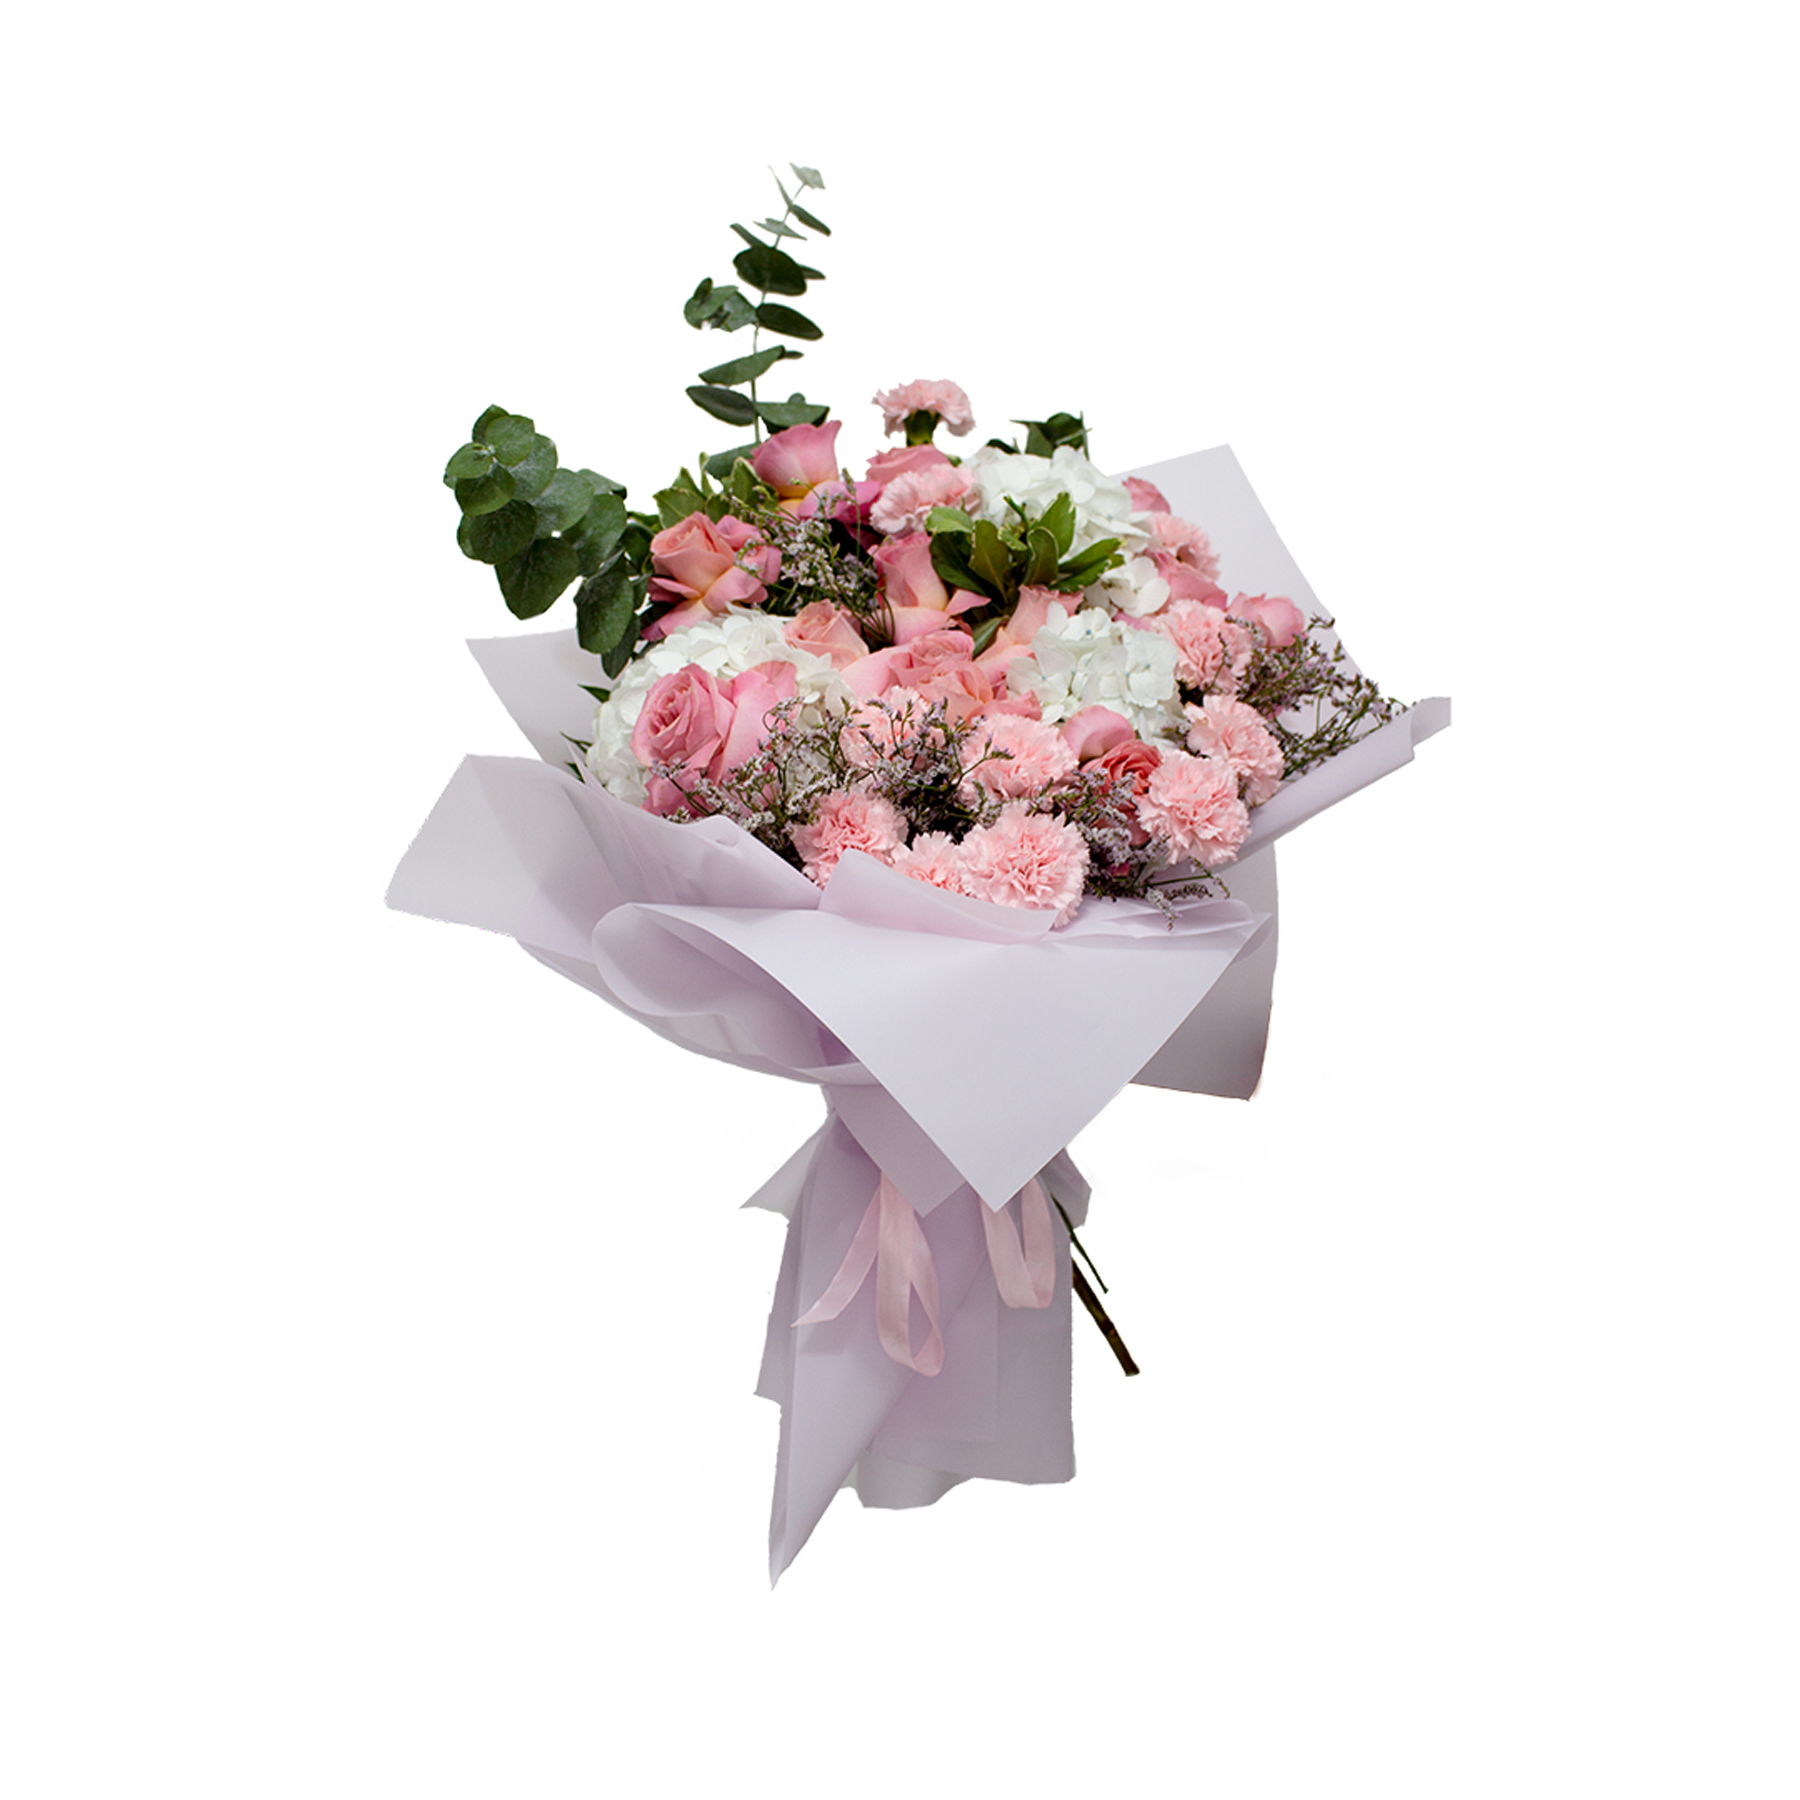 Pink Roses With hyderangea 1